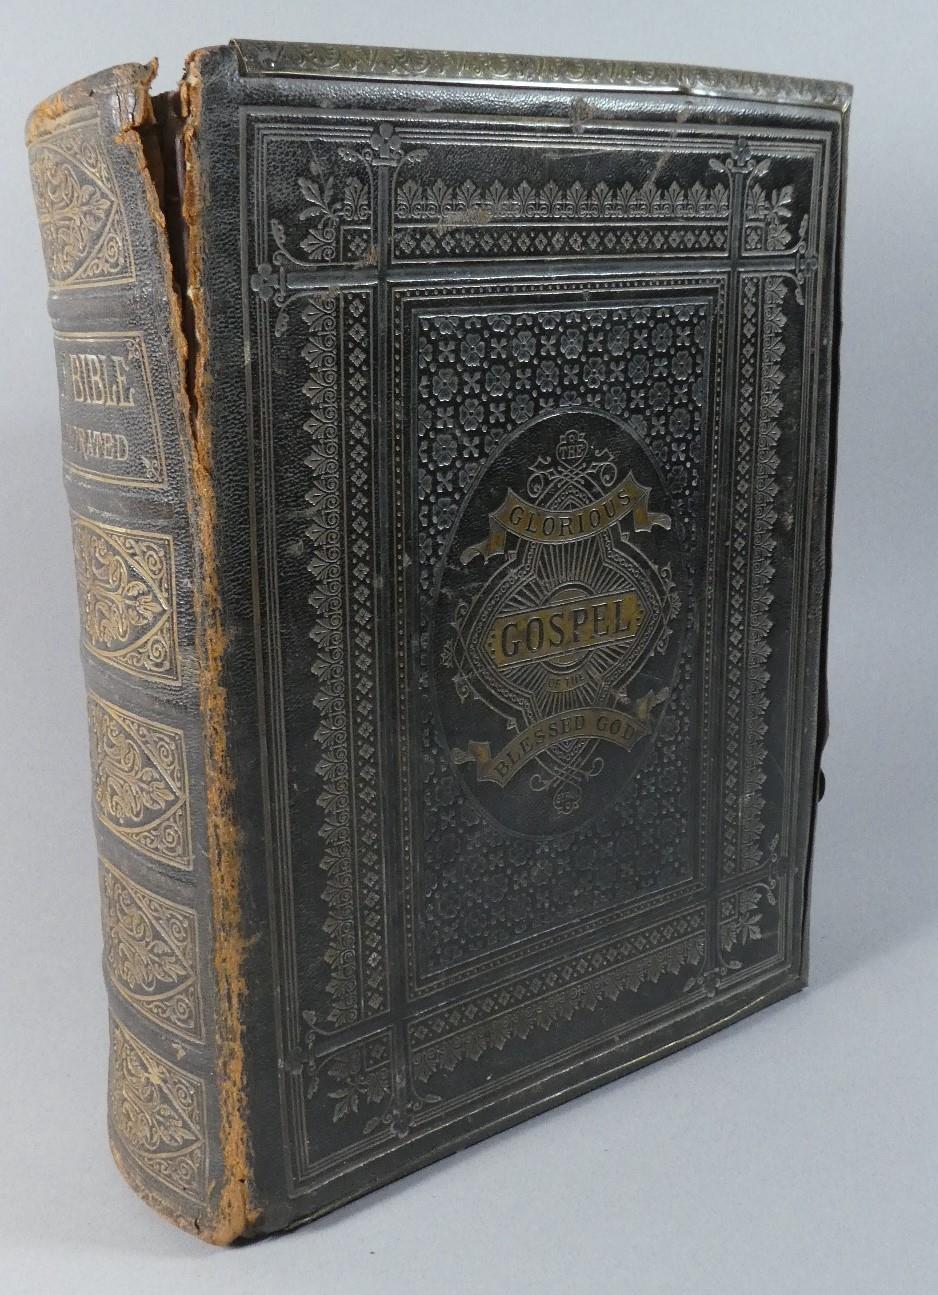 A 19th Century Self-interpreting Family Bible by Rev. John Brown, Published by Thomas C. Jack,